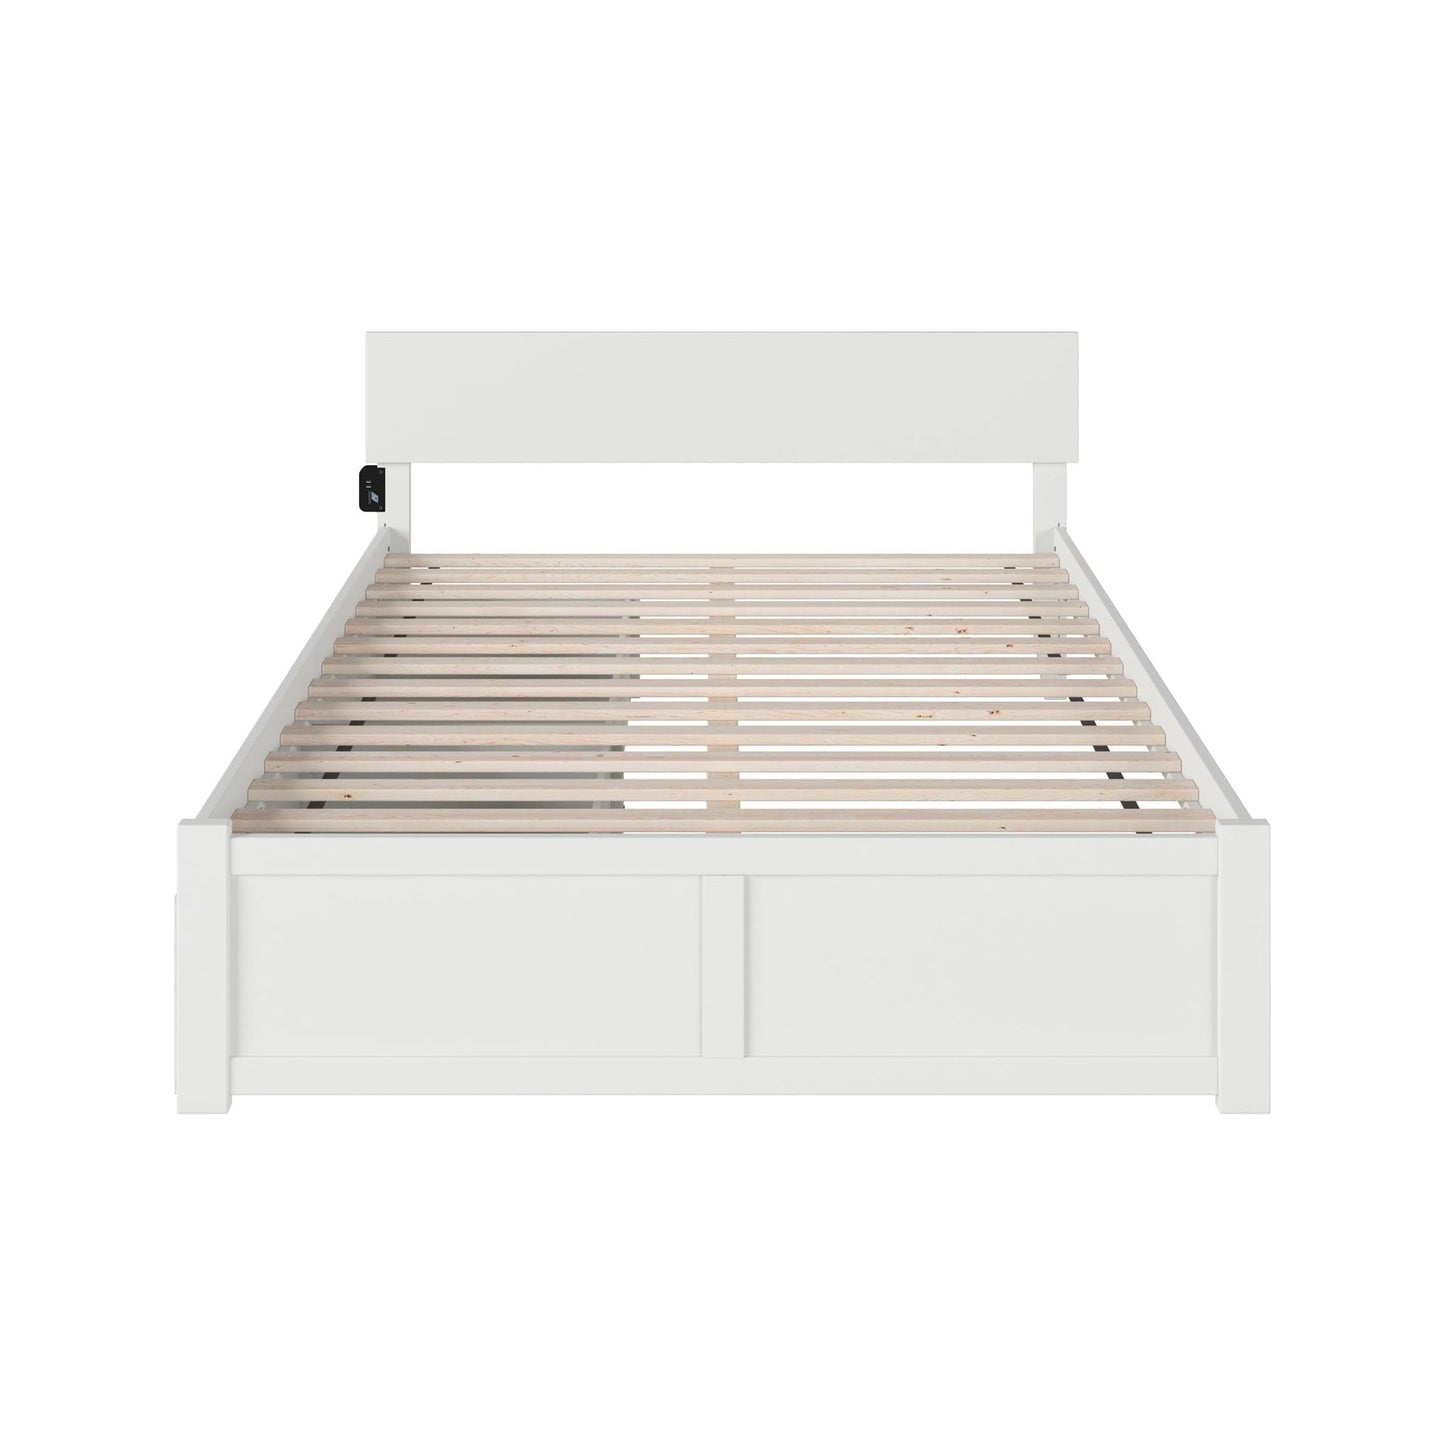 AFI Furnishings Orlando King Bed with Flat Panel Footboard and Set of 2 Drawers in White AR8152112